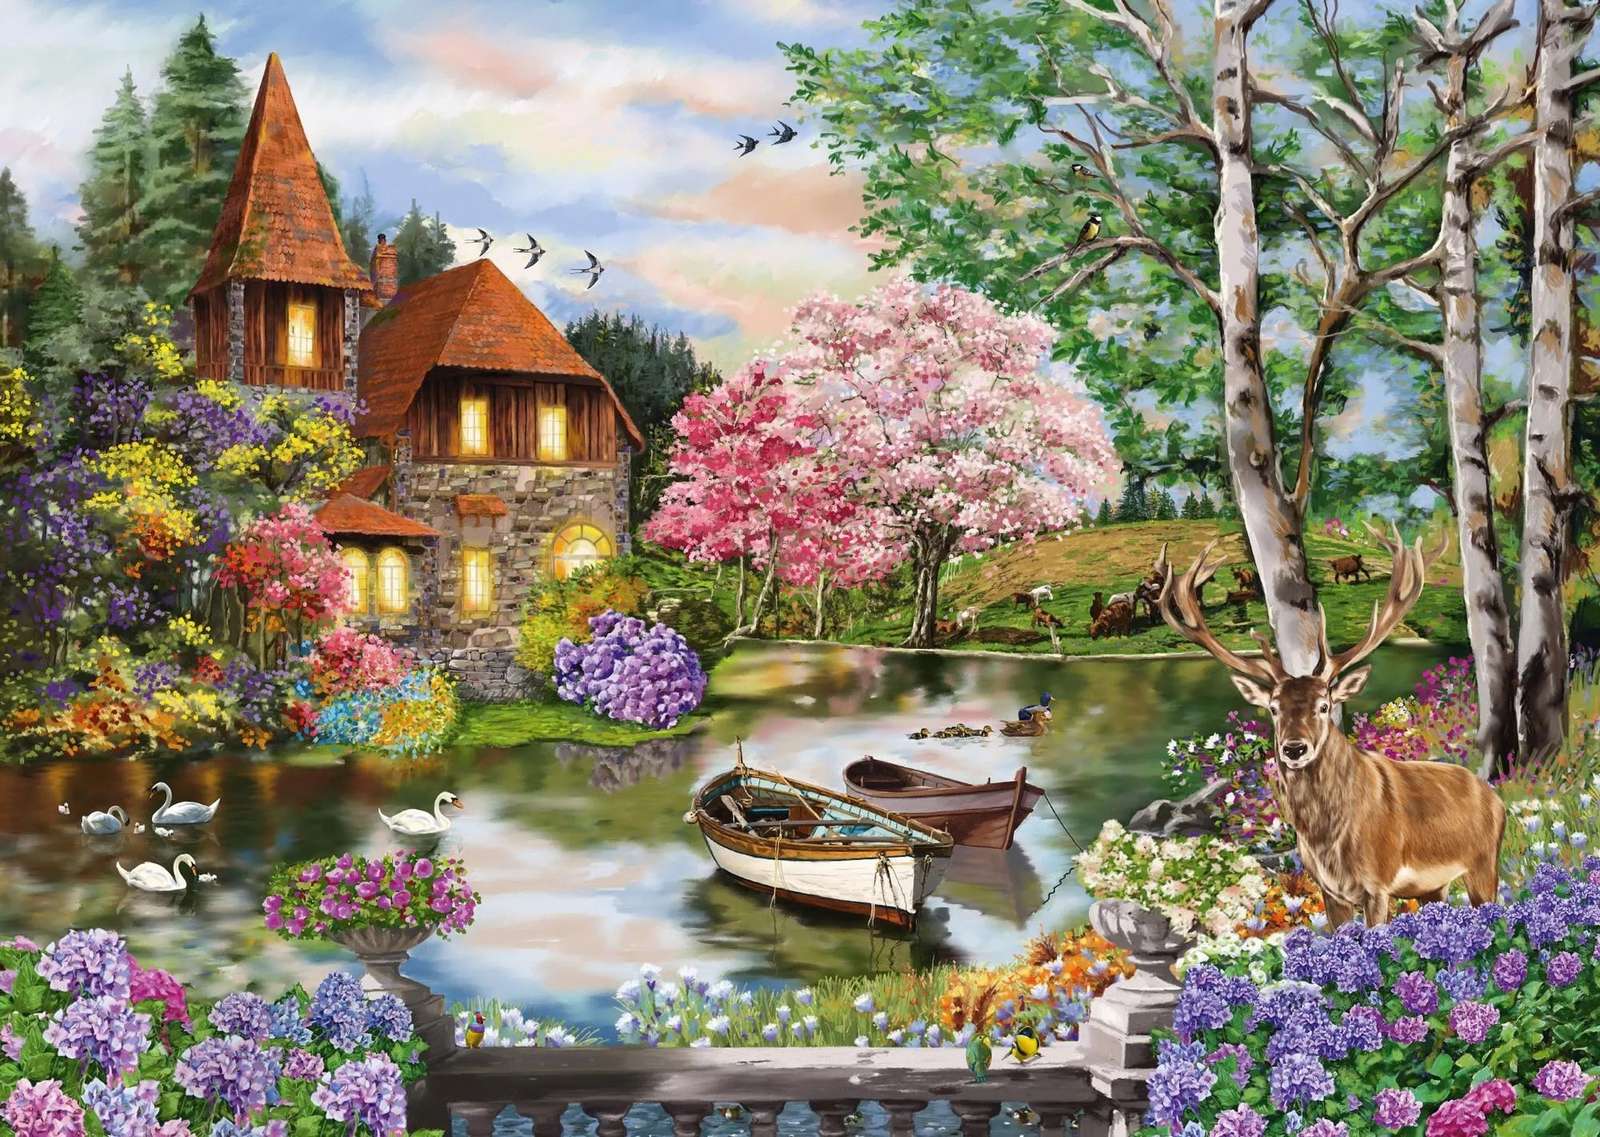 Haus am See Online-Puzzle